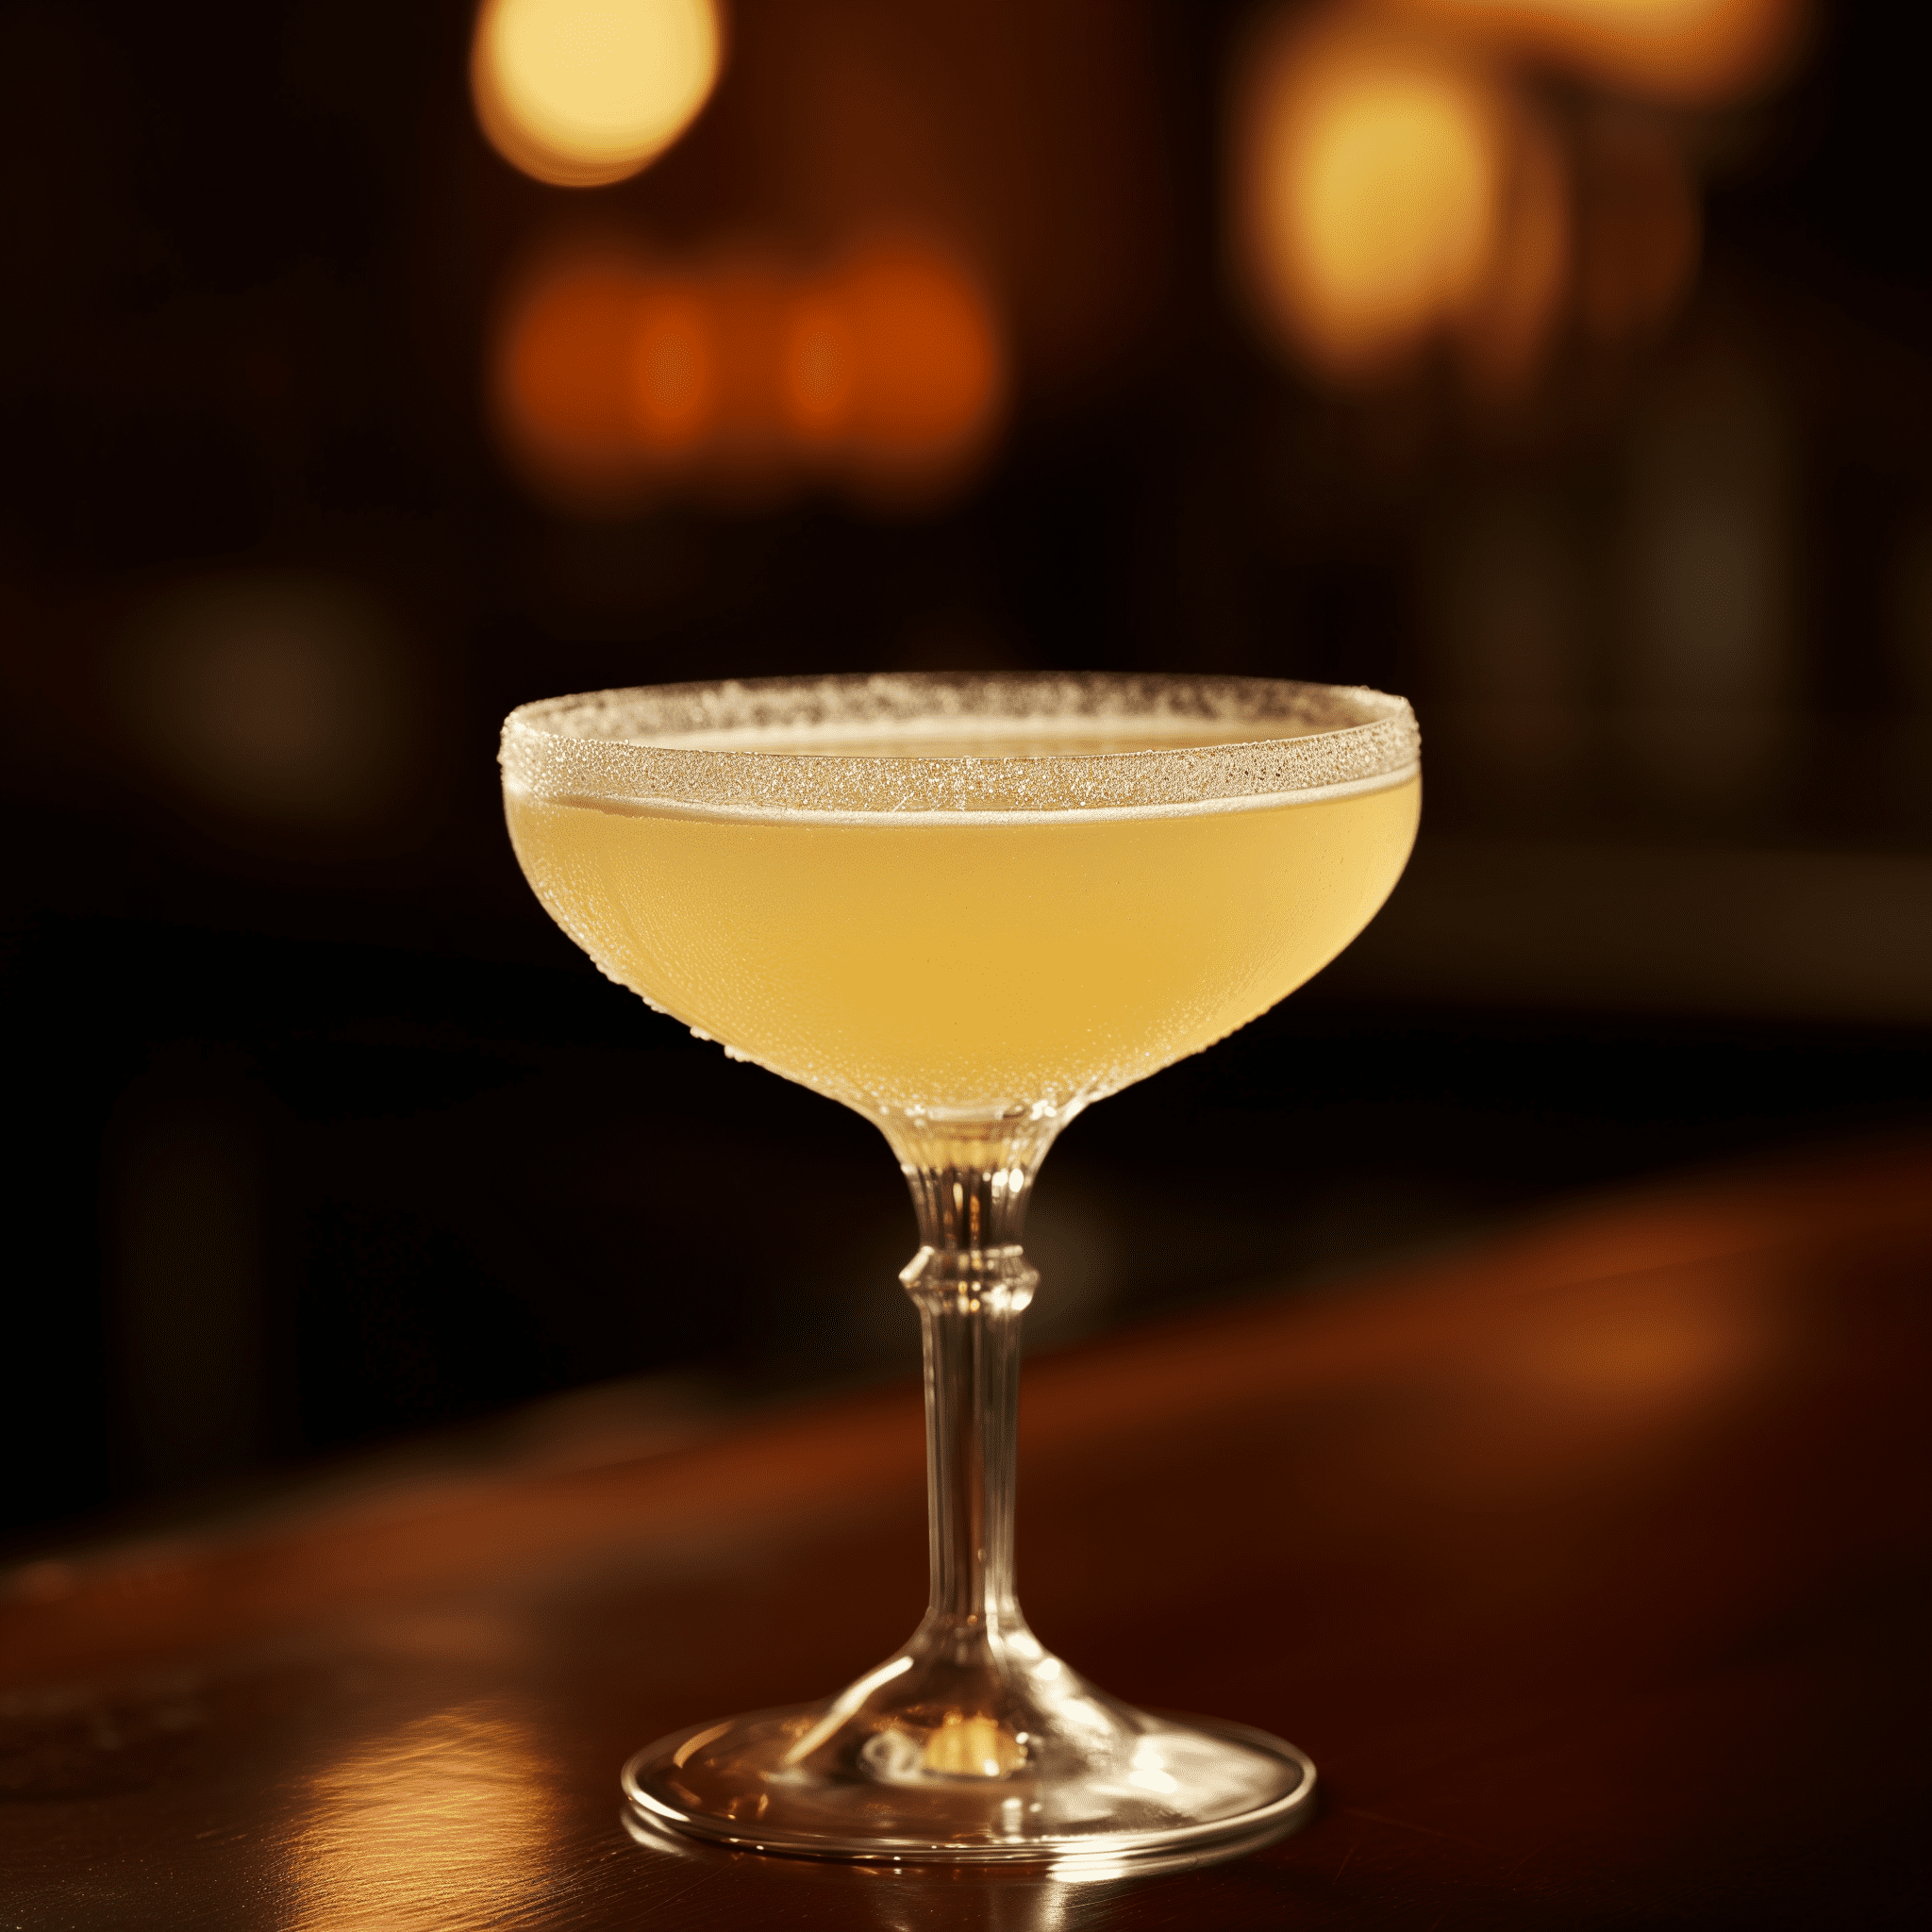 Fine and Dandy Cocktail Recipe - The Fine and Dandy cocktail offers a refreshing balance between the botanical notes of gin and the sharpness of lemon juice. The triple sec provides a subtle sweetness and orange flavor, while the bitters add a layer of complexity. Overall, it's a bright, zesty, and slightly sweet concoction with a sophisticated edge.